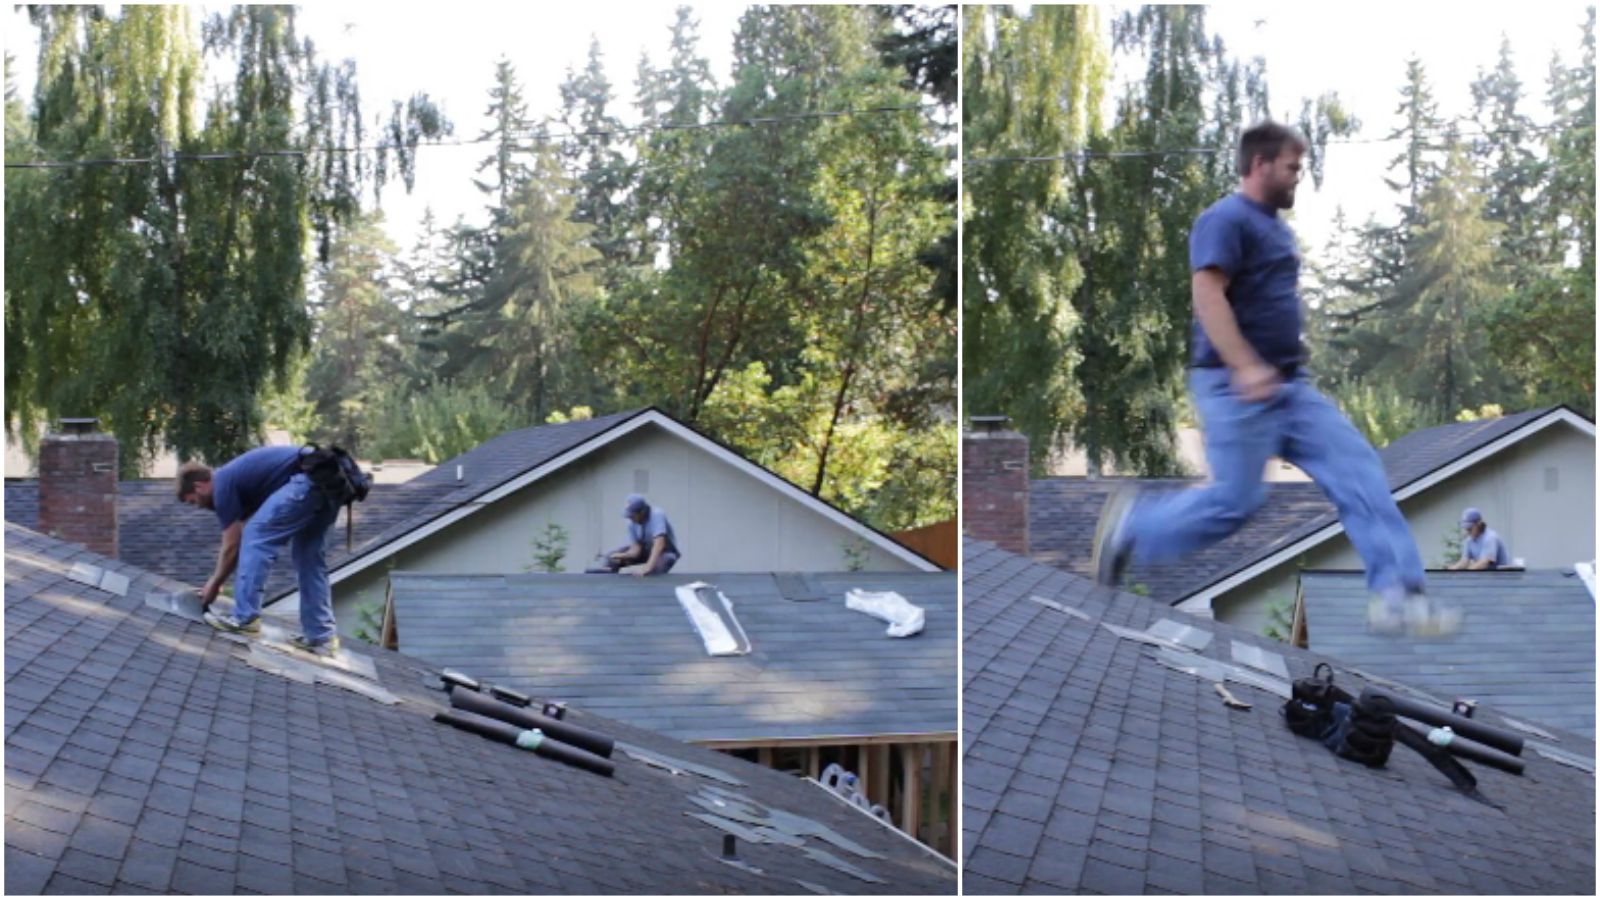 When THIS Song Starts Playing, This Roofer Had to Drop His Hammer and Let the Music Move Him